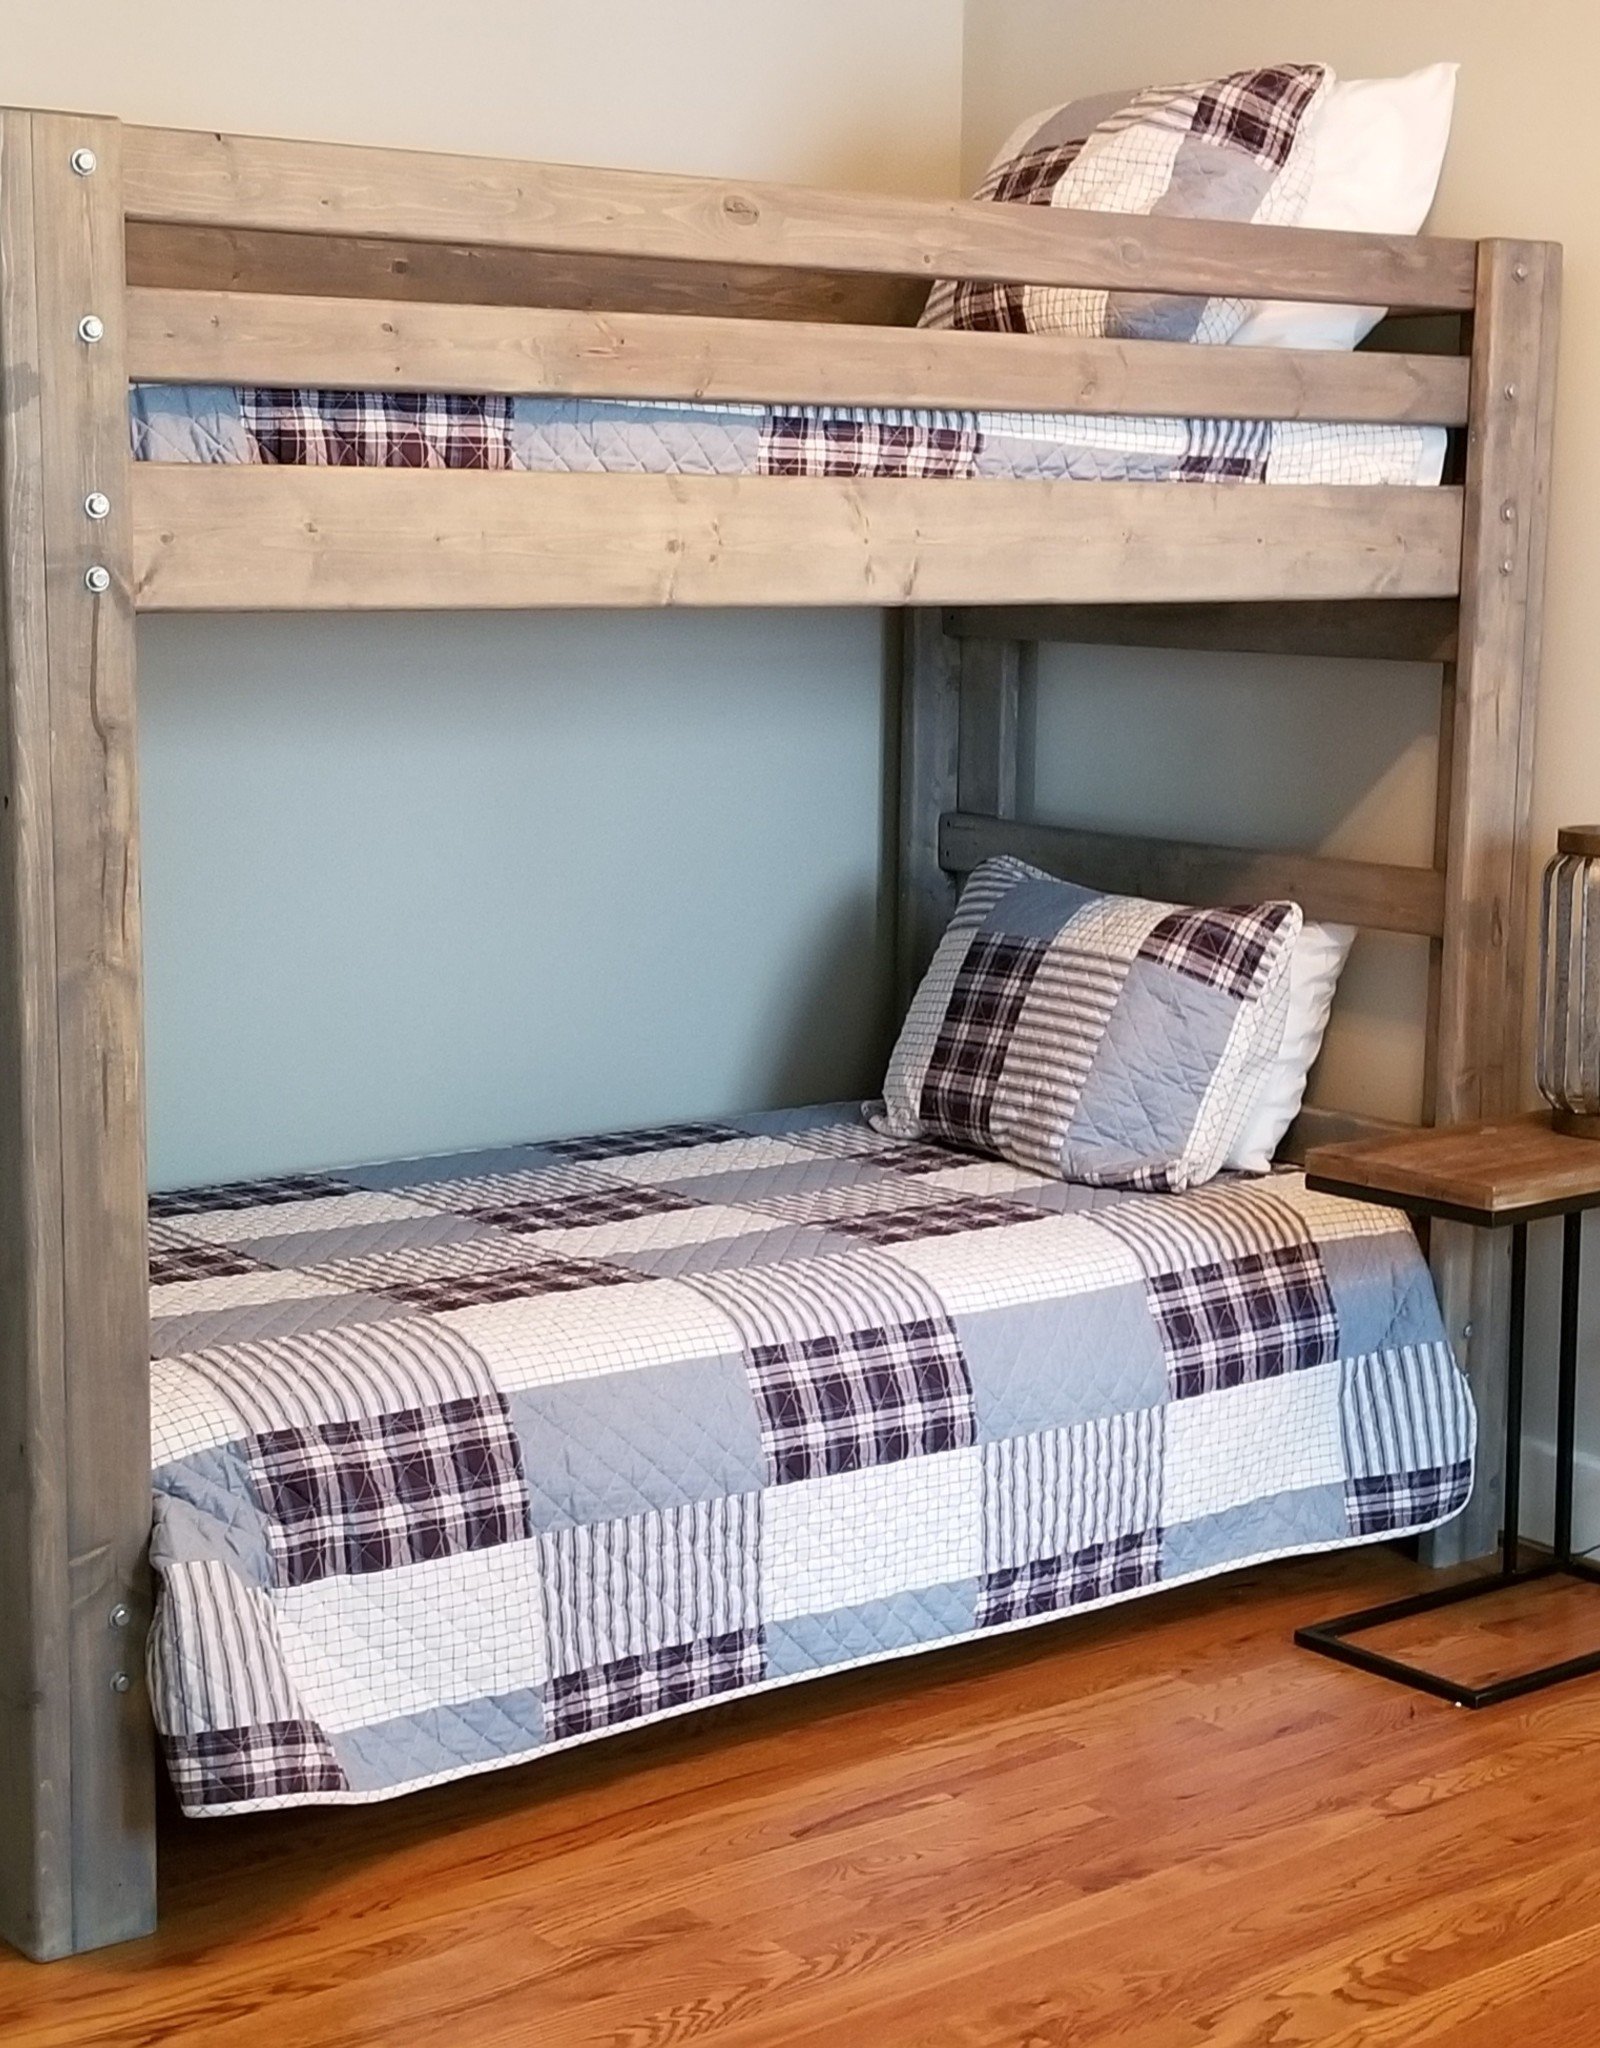 Traditional Bunk Bed Bargain Box And, Bunk Beds That Hold 300 Lbs